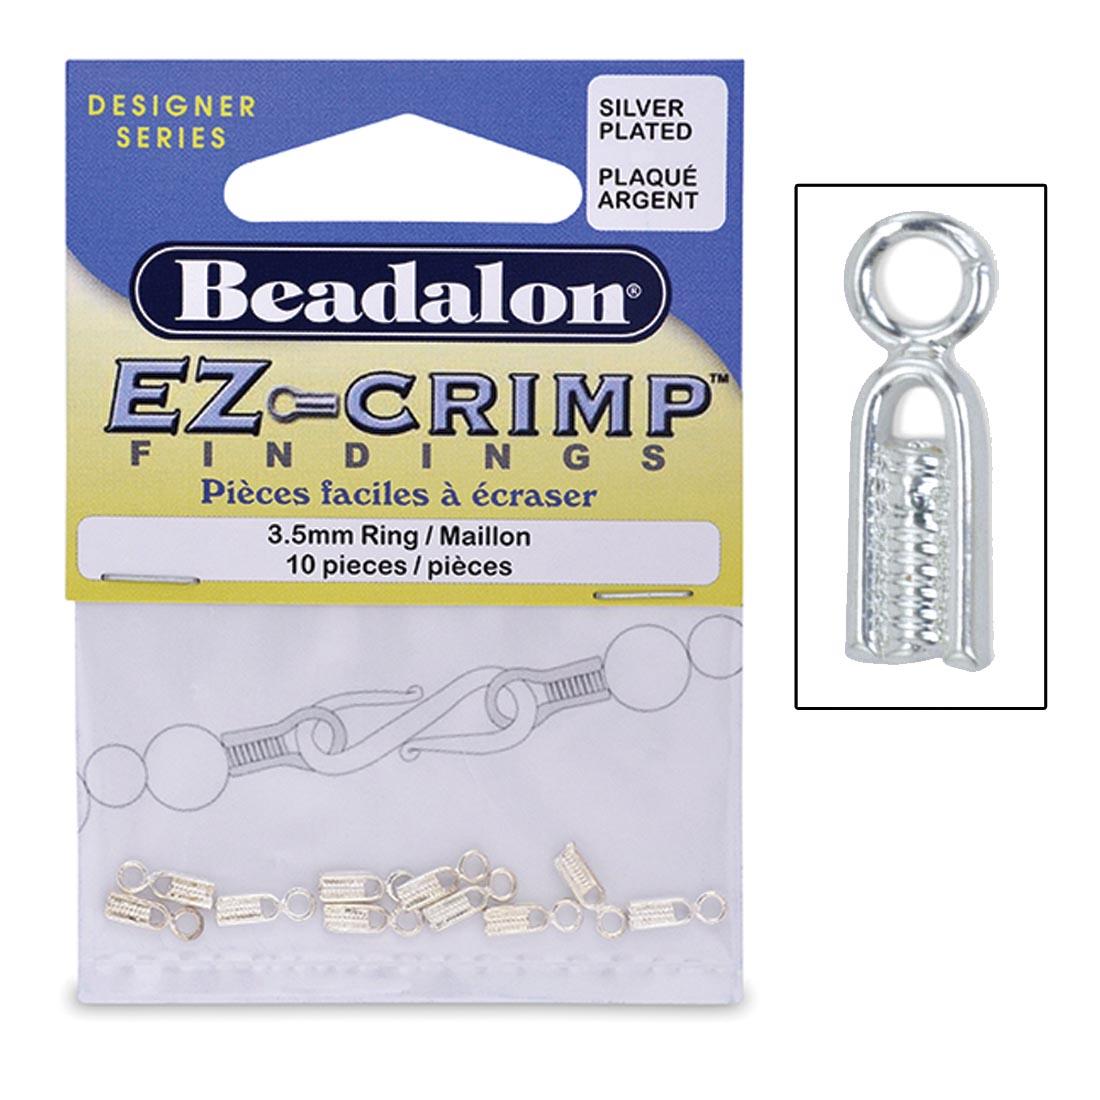 Package of Beadalon EZ Crimps with an inset closeup of one